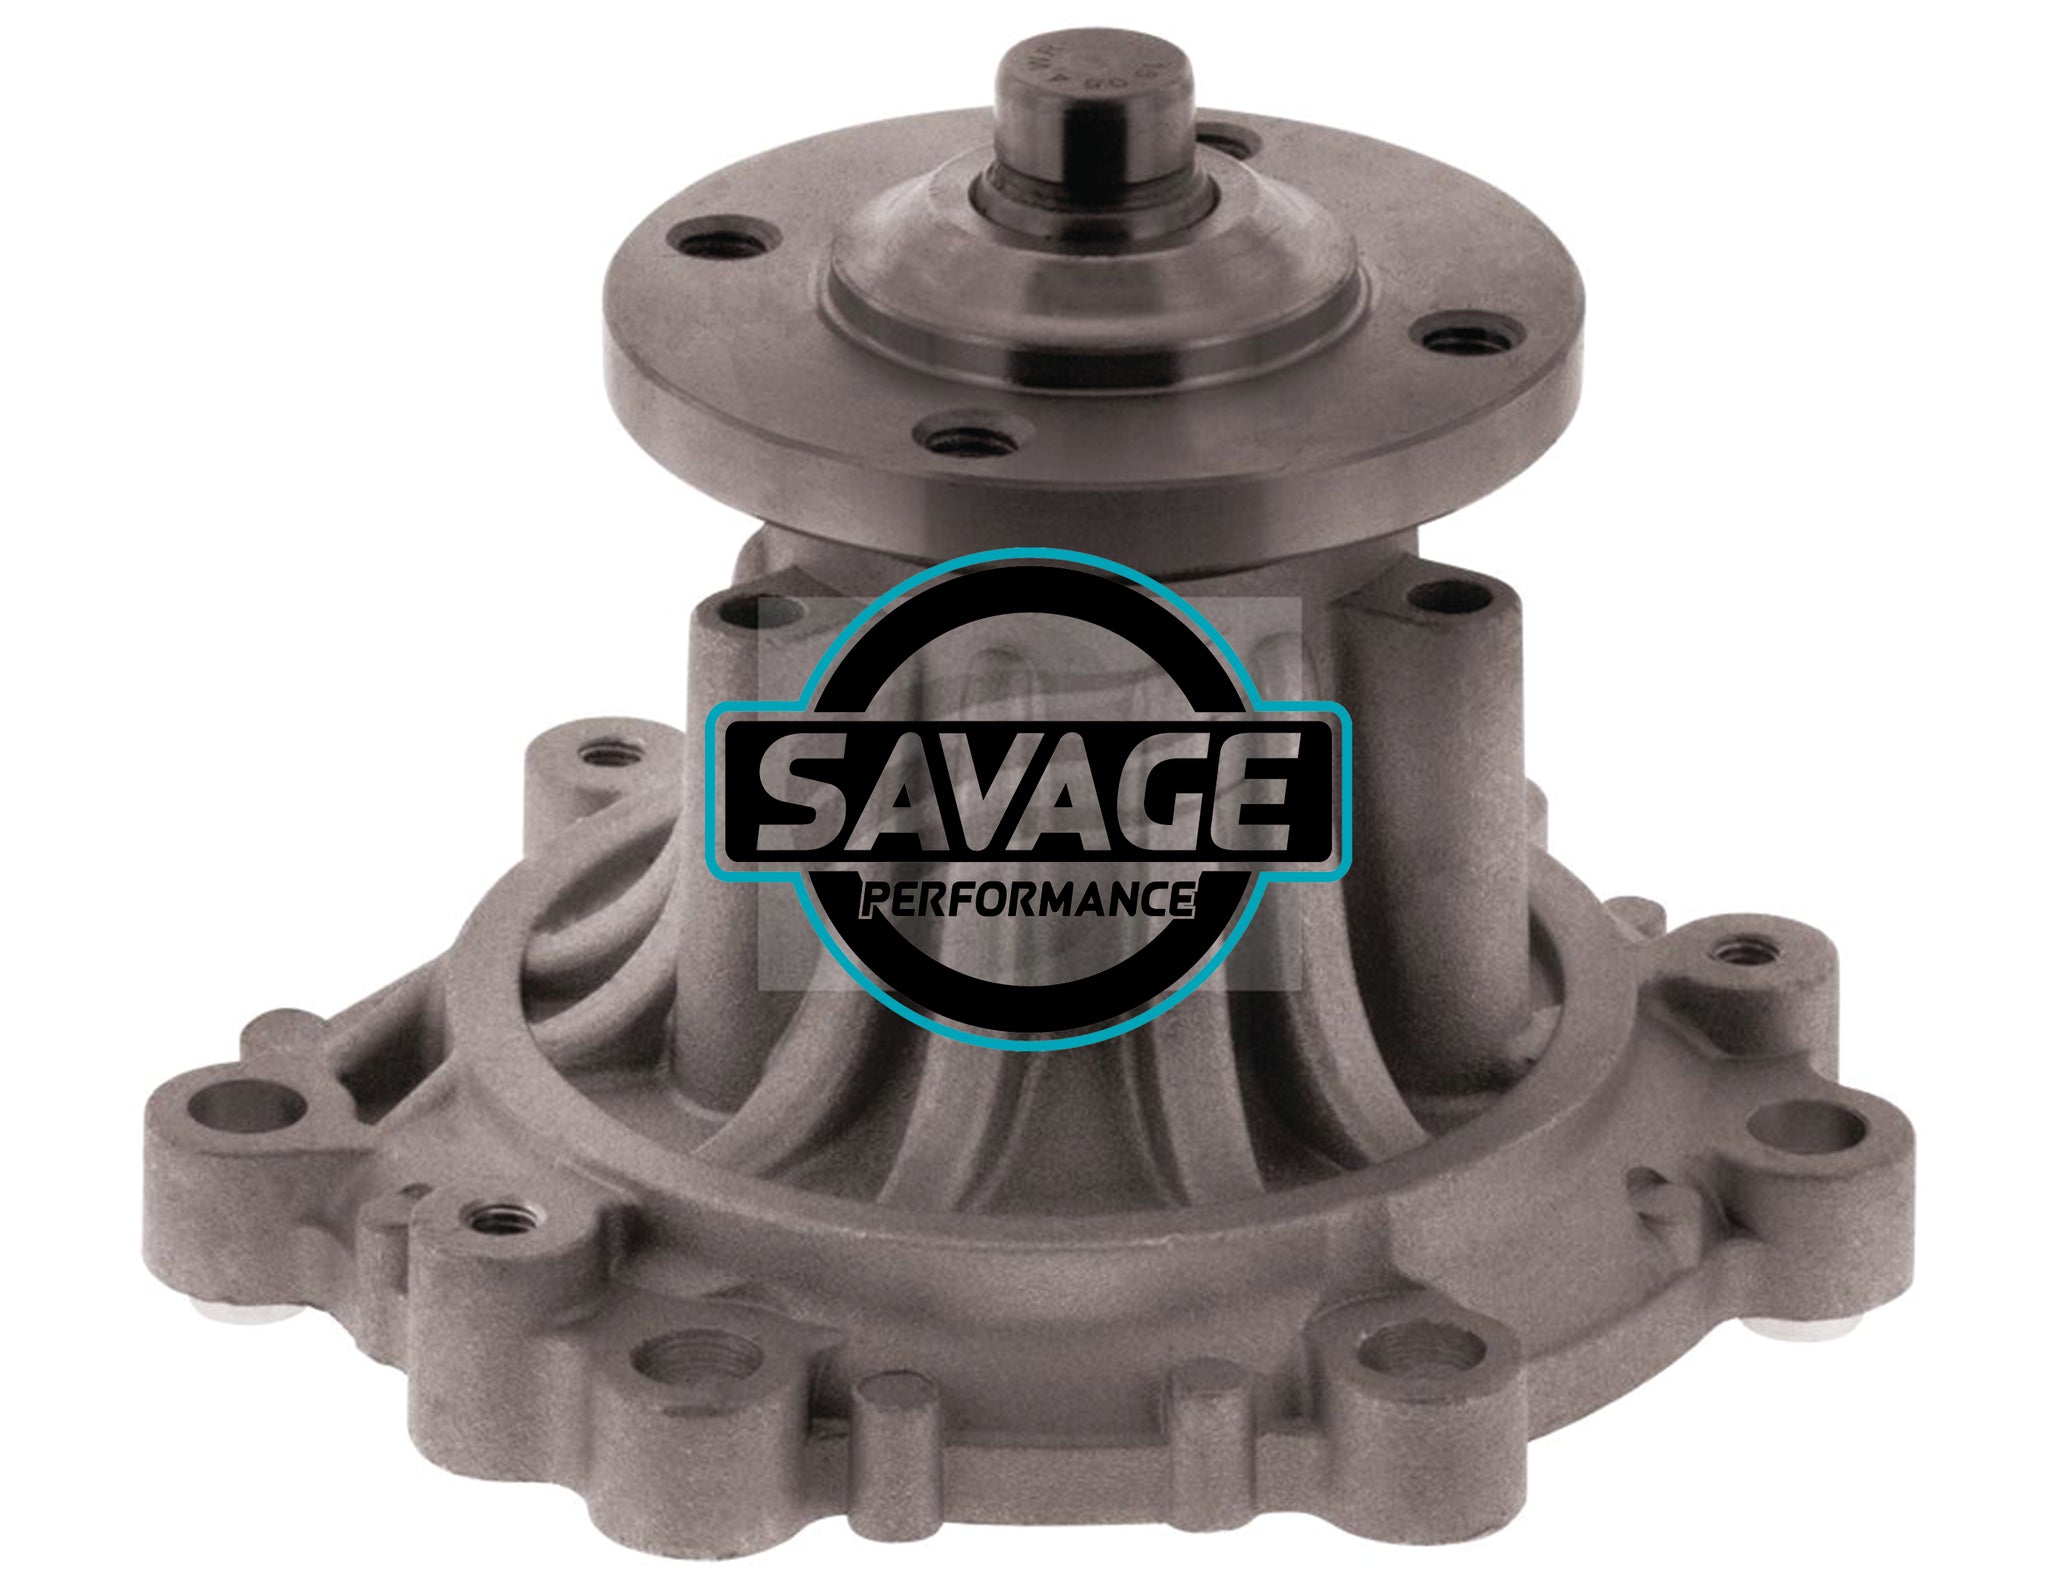 JAYRAD - Aftermarket Toyota 4Runner Hiace Hilux Dyna Water Pump